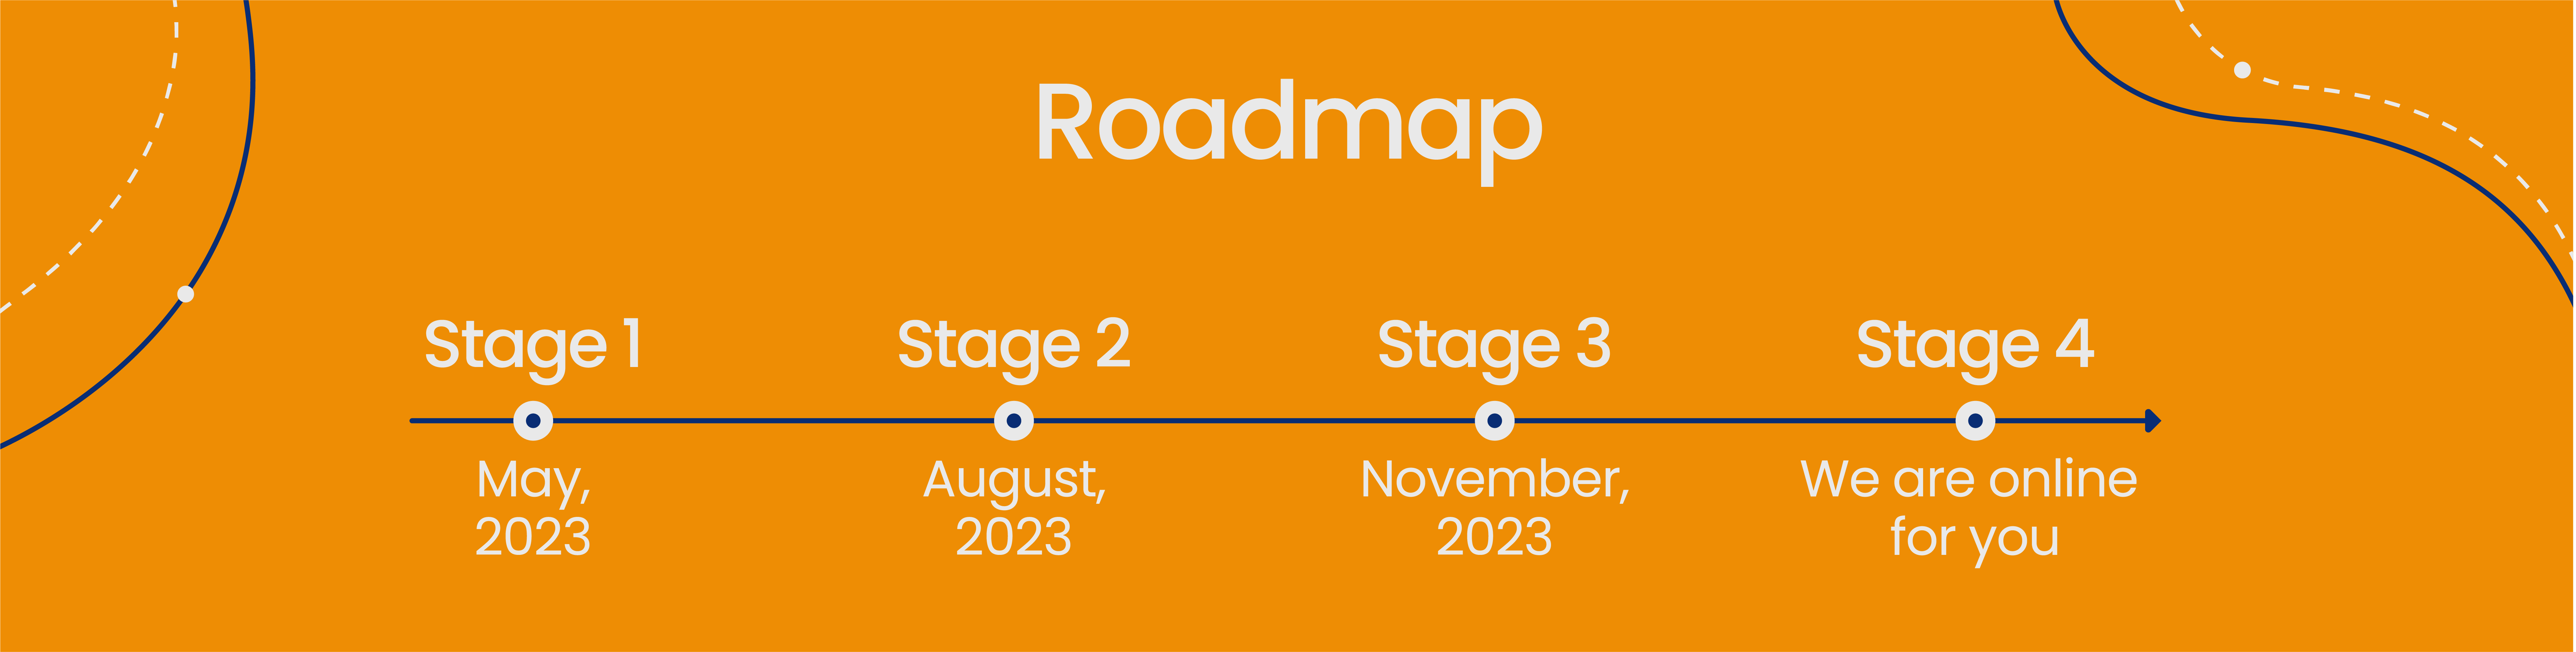 road-map_ENG